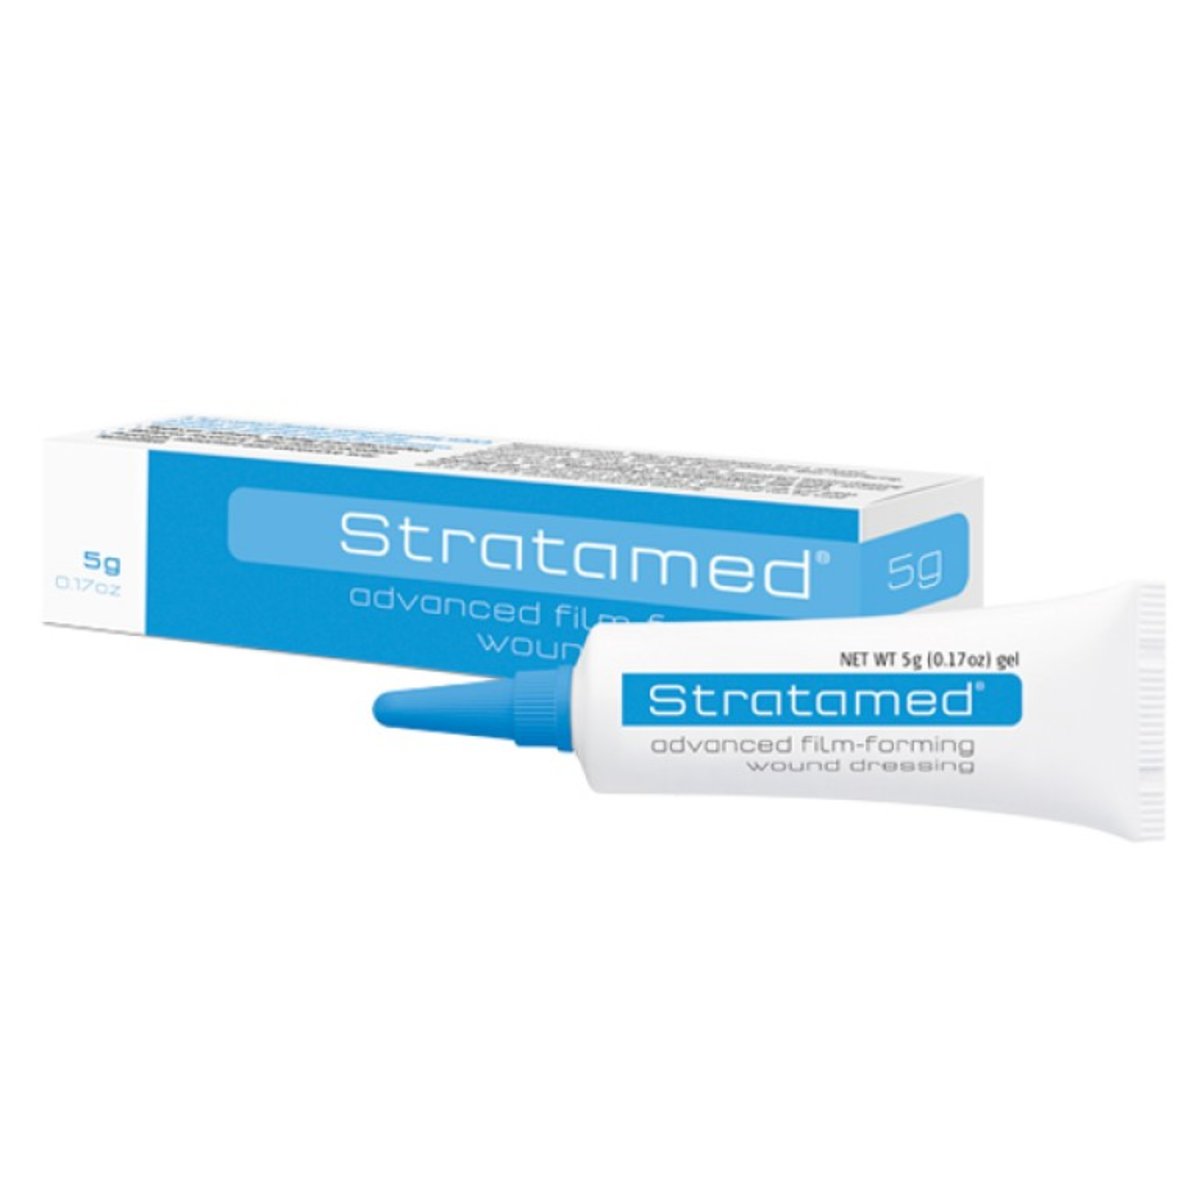 Stratamed advanced film-forming wound dressing 5g